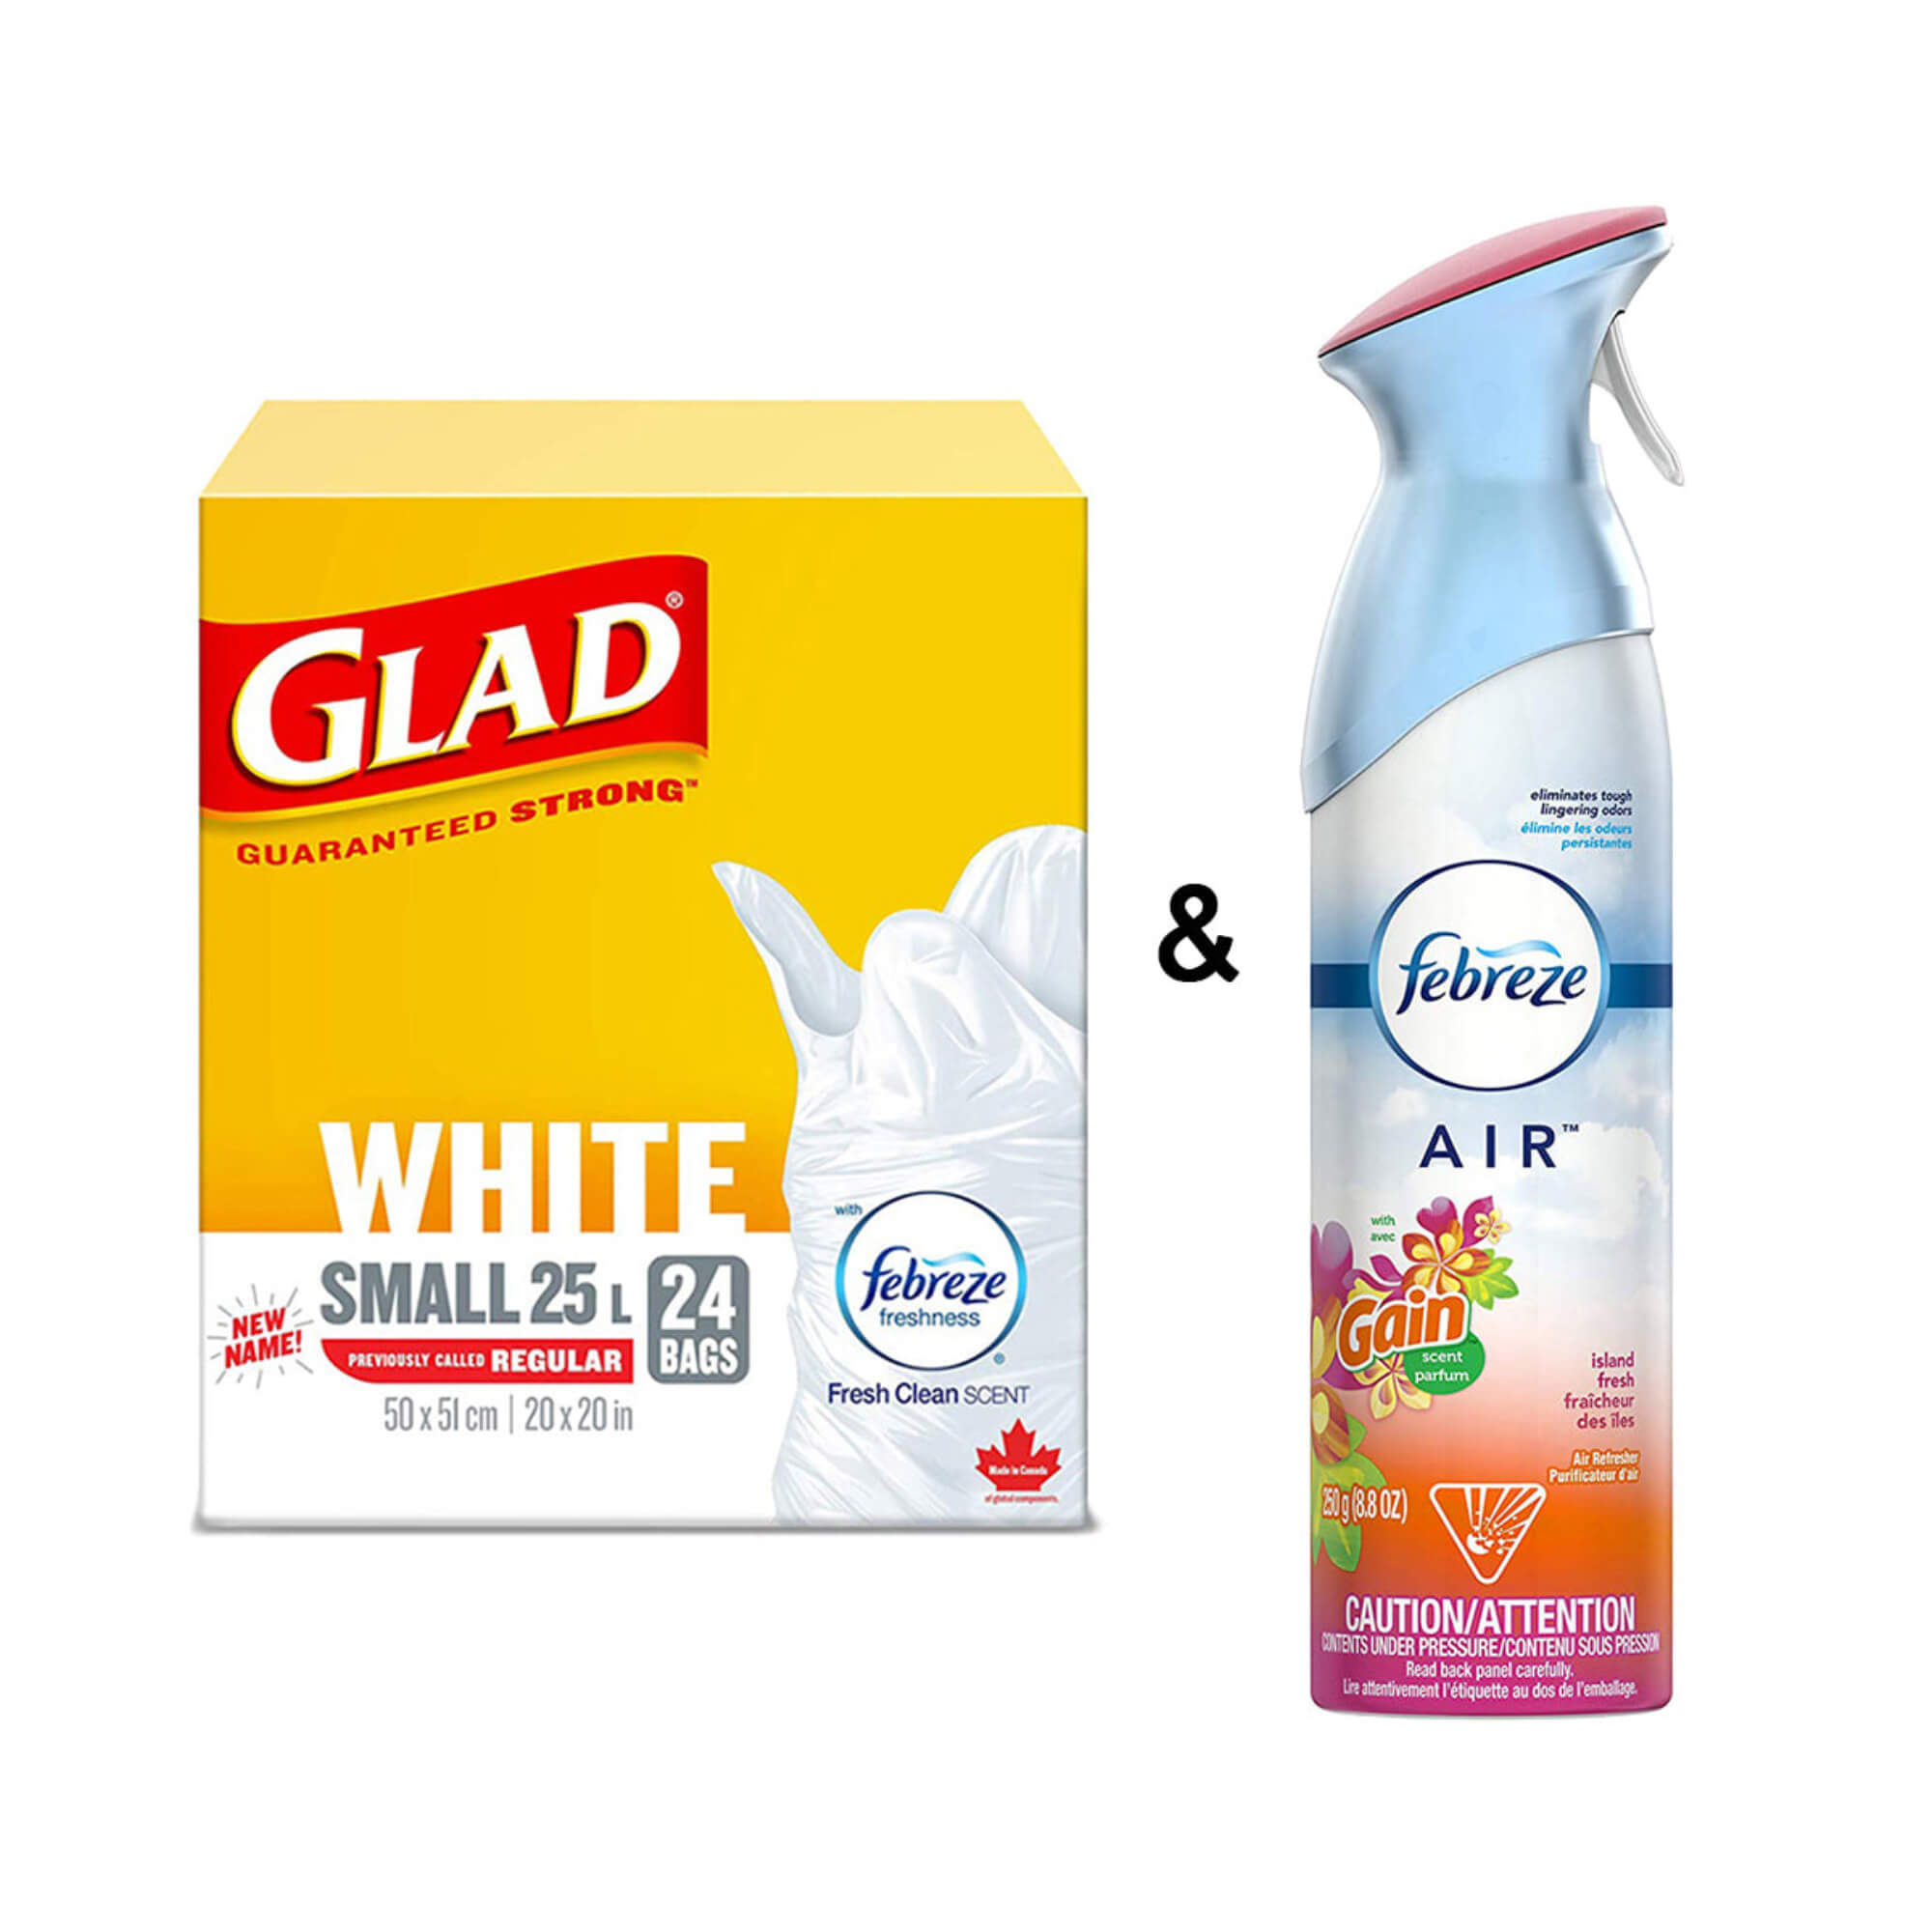 Air Freshener & Glad White Garbage - Small 25 L, 24 Bags